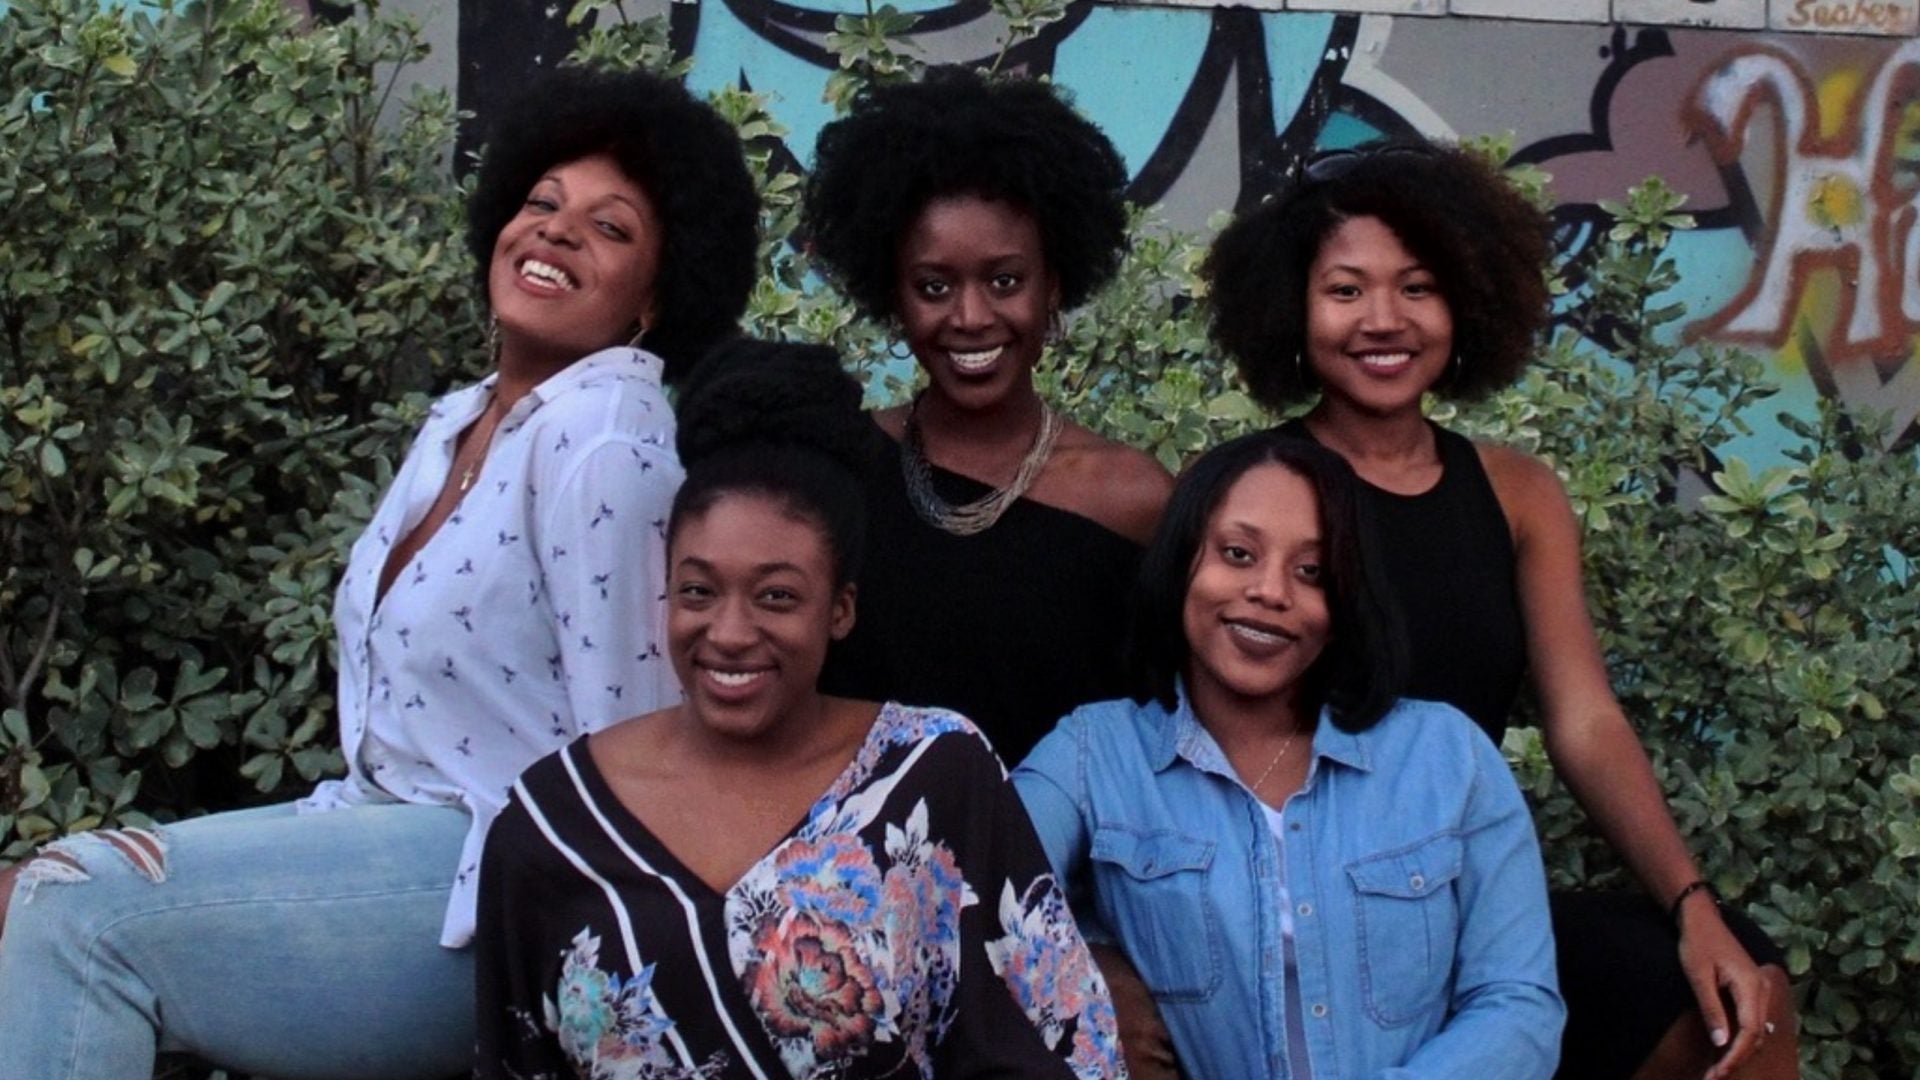 EXCLUSIVE: Hairstylists Required To Cut Textured Hair In Order To Get License—Black Professionals Weigh-In